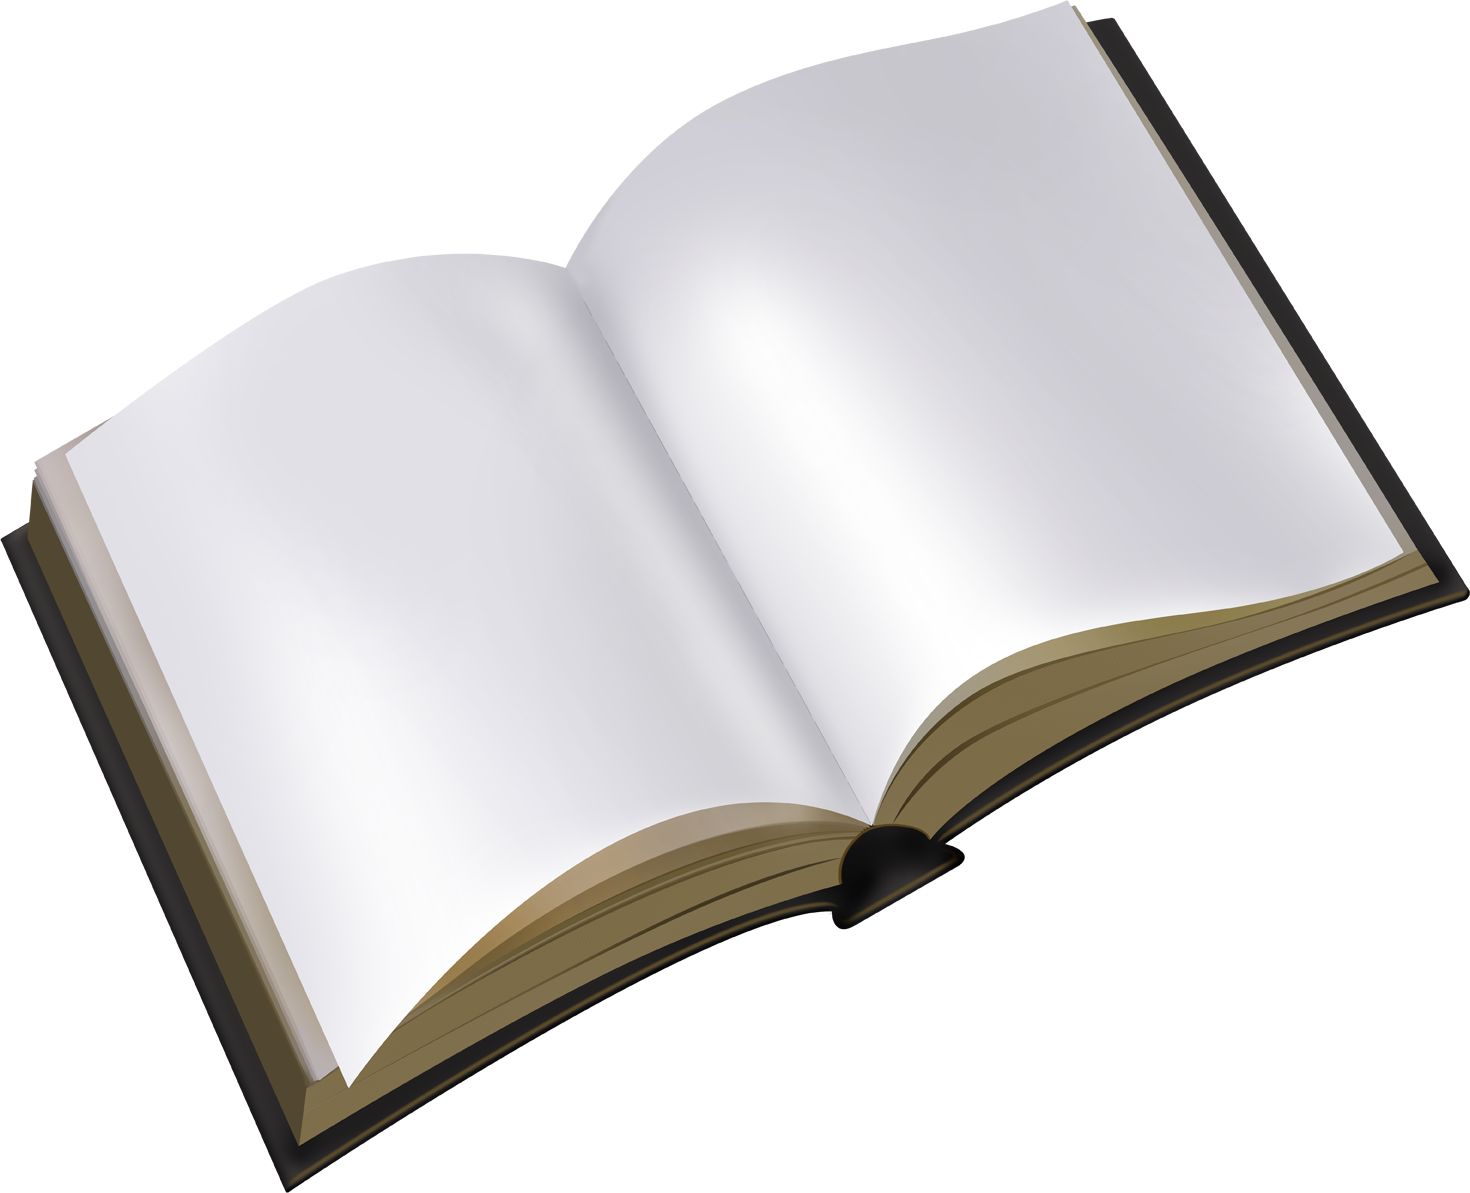 open book png